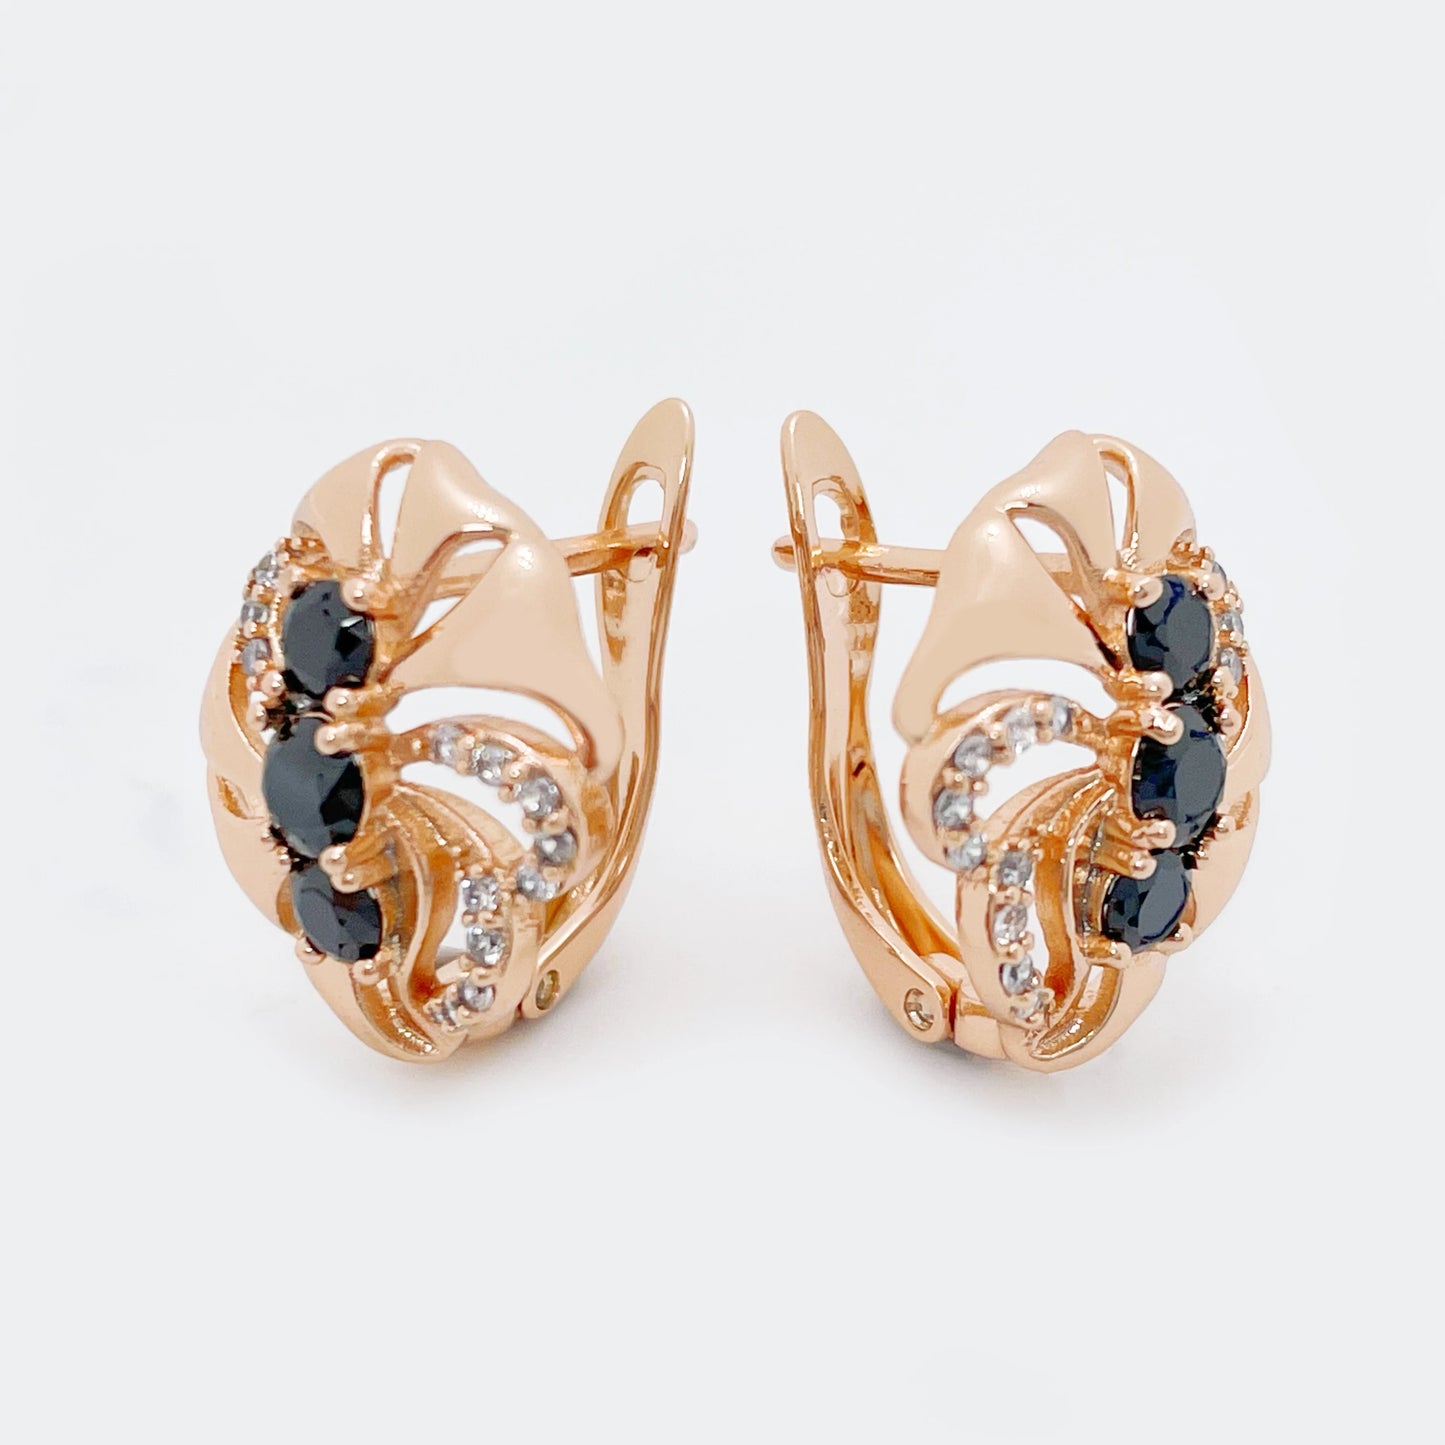 New Daily Women Romantic Fine Fashion Jewelry 585 Rose Gold Royal Blue/Black Natural Zircon Hollow Exclusive Drop Earrings